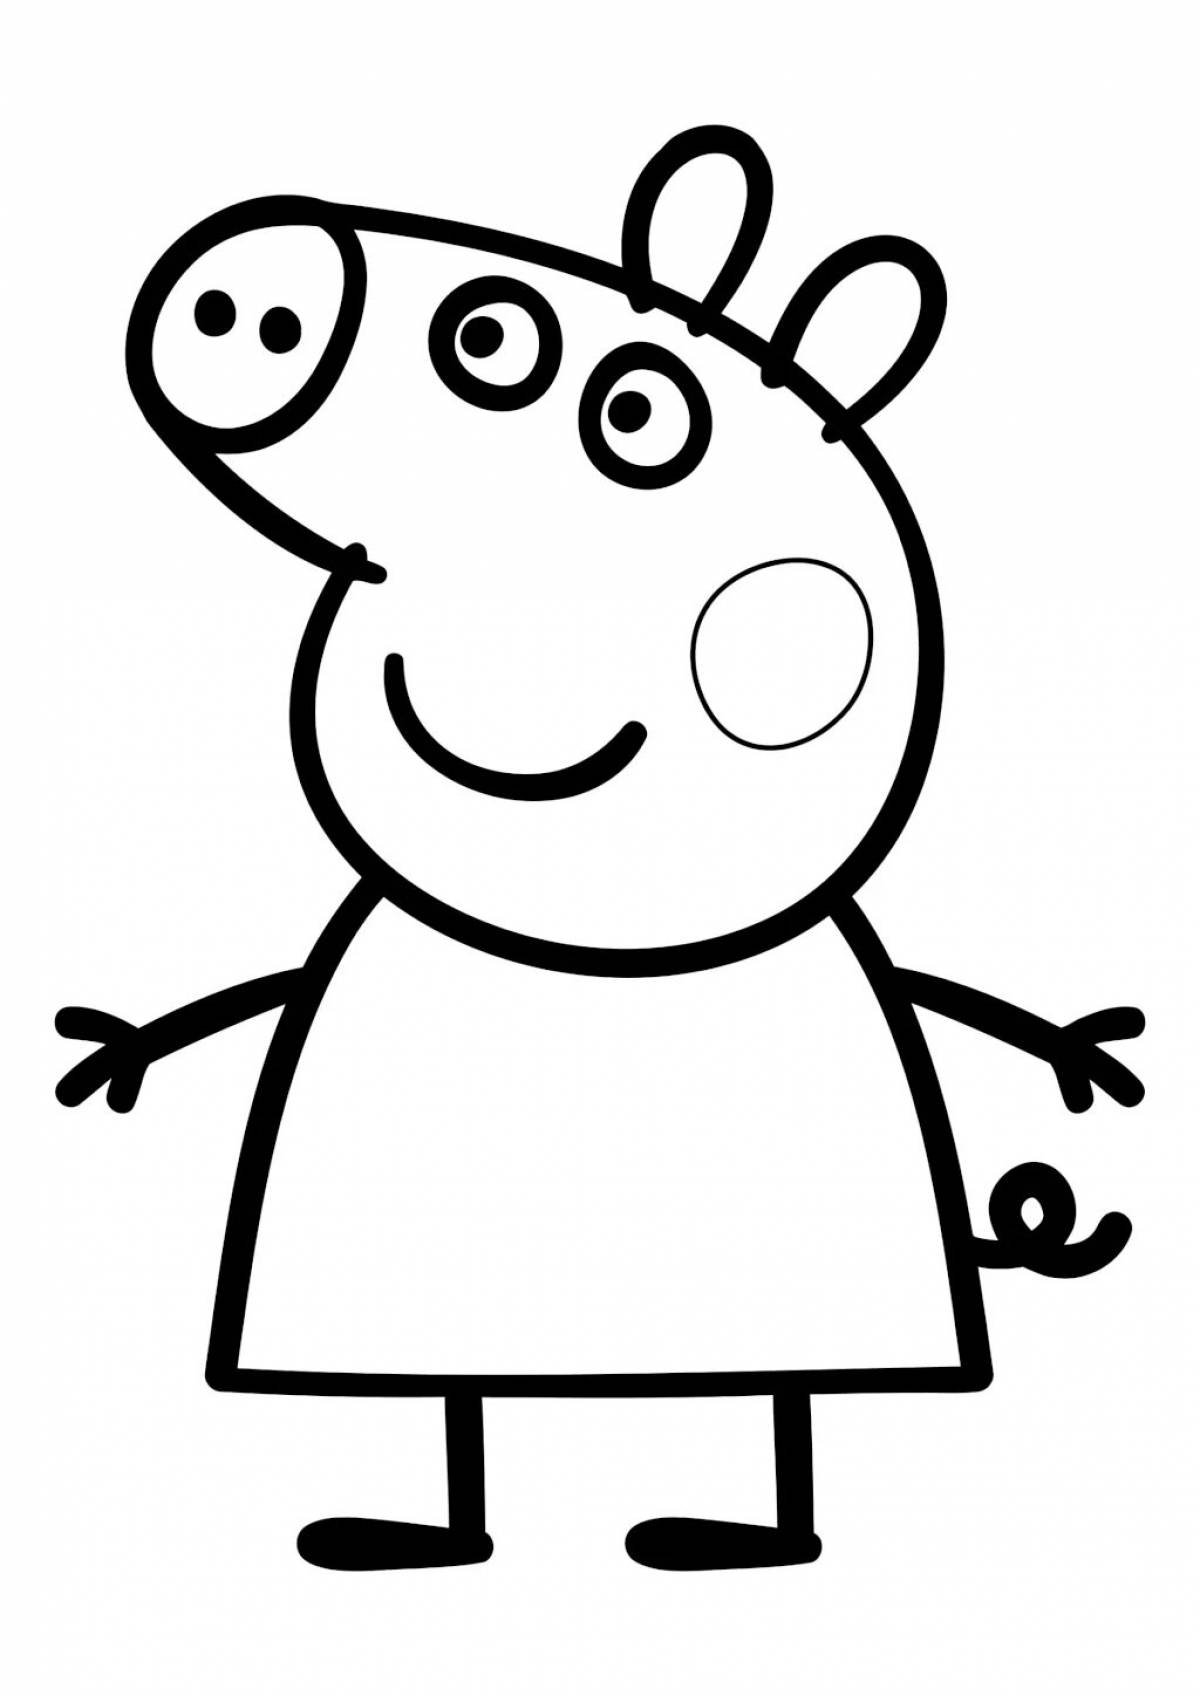 Peppa Pig coloring page with splashes of color